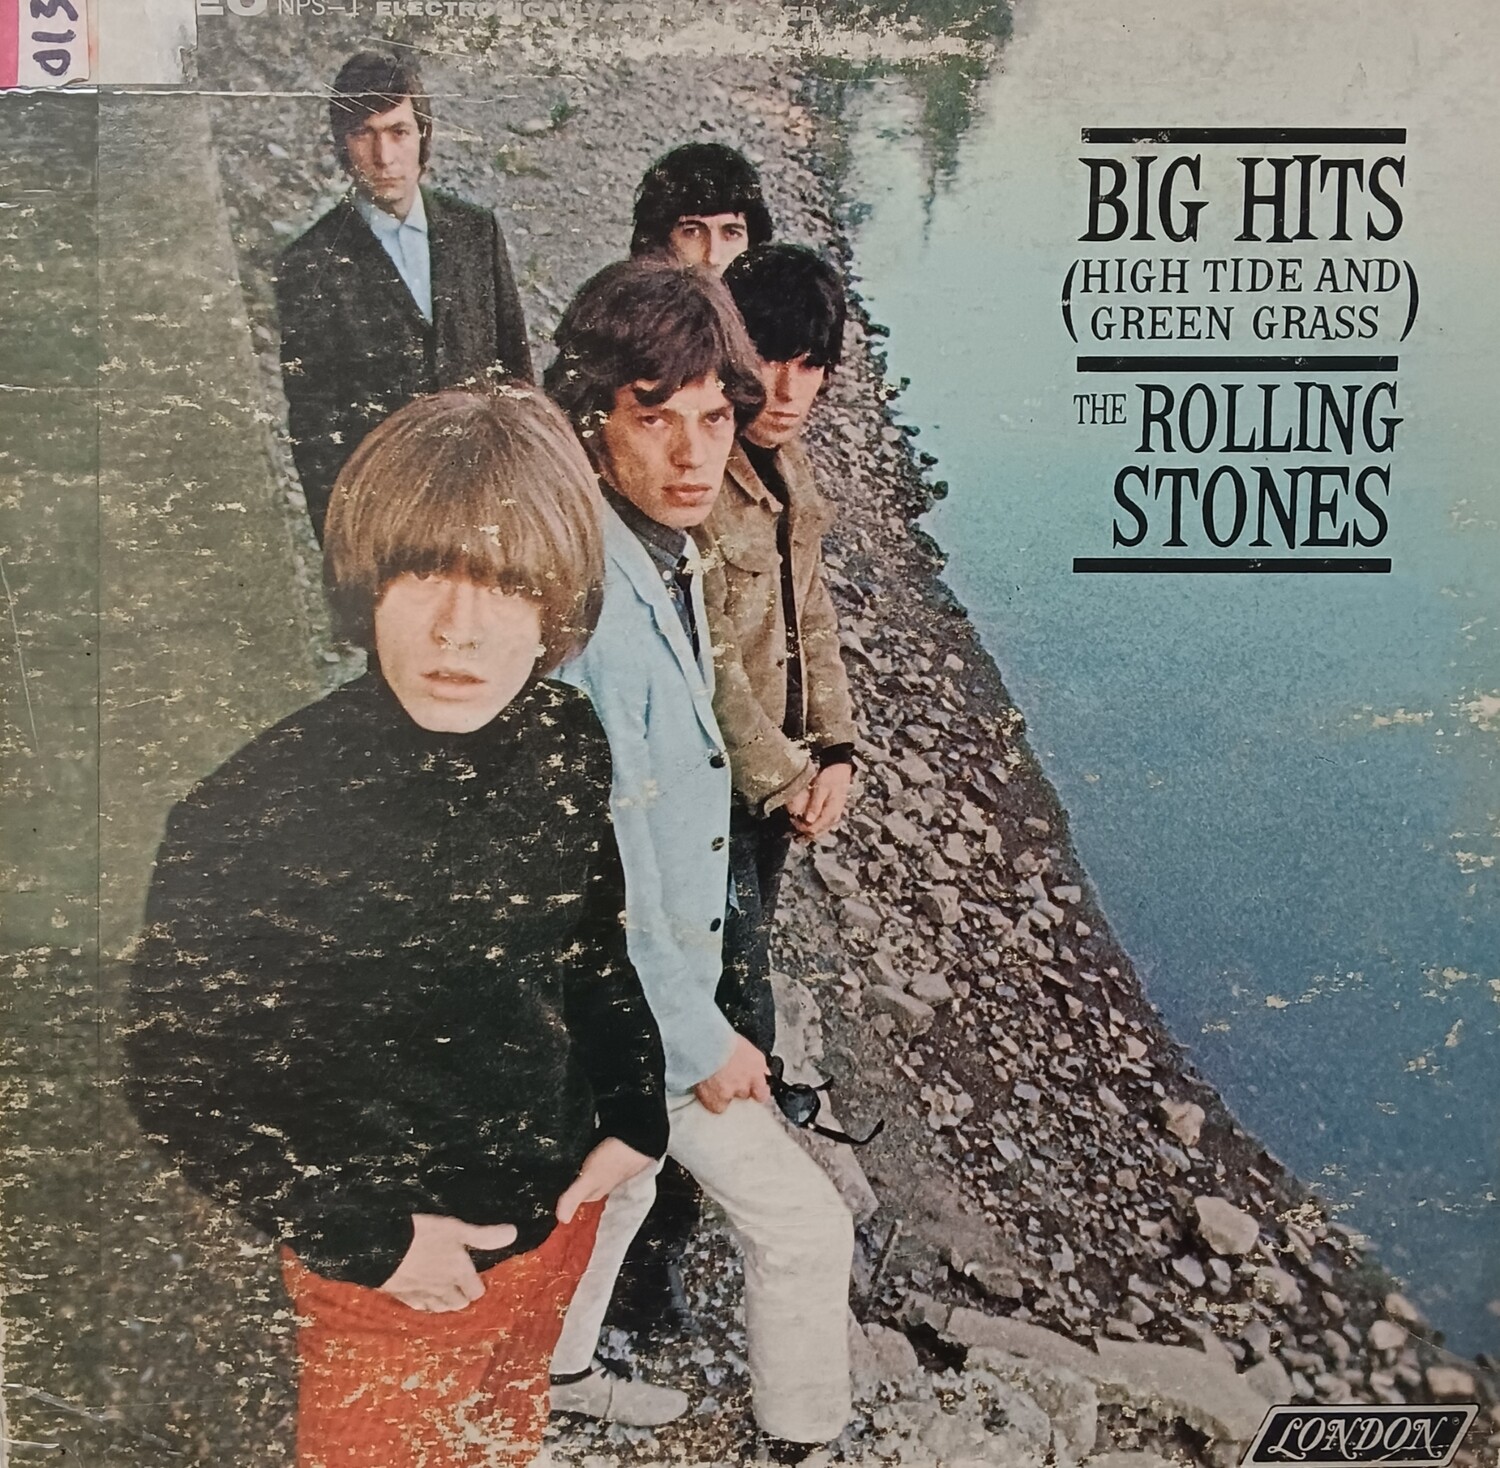 The Rolling Stones - Big hits (High Tide and Green Grass)